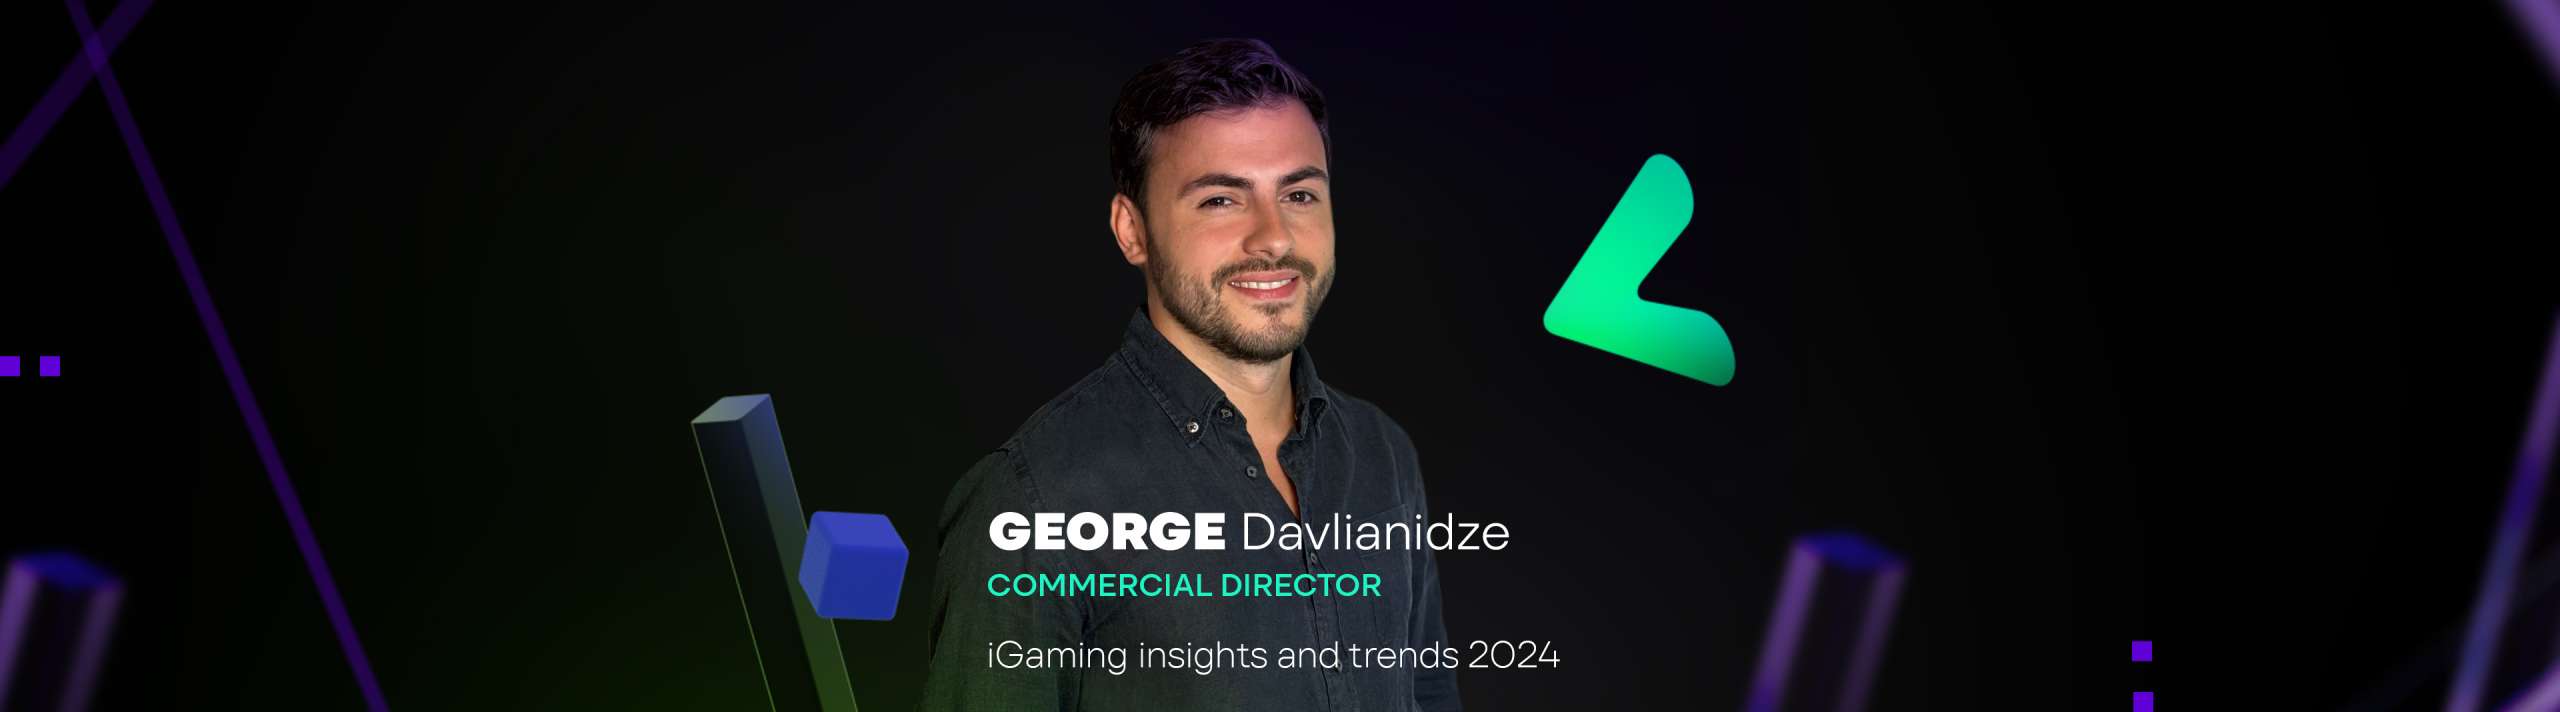 iGaming insights and trends 2024